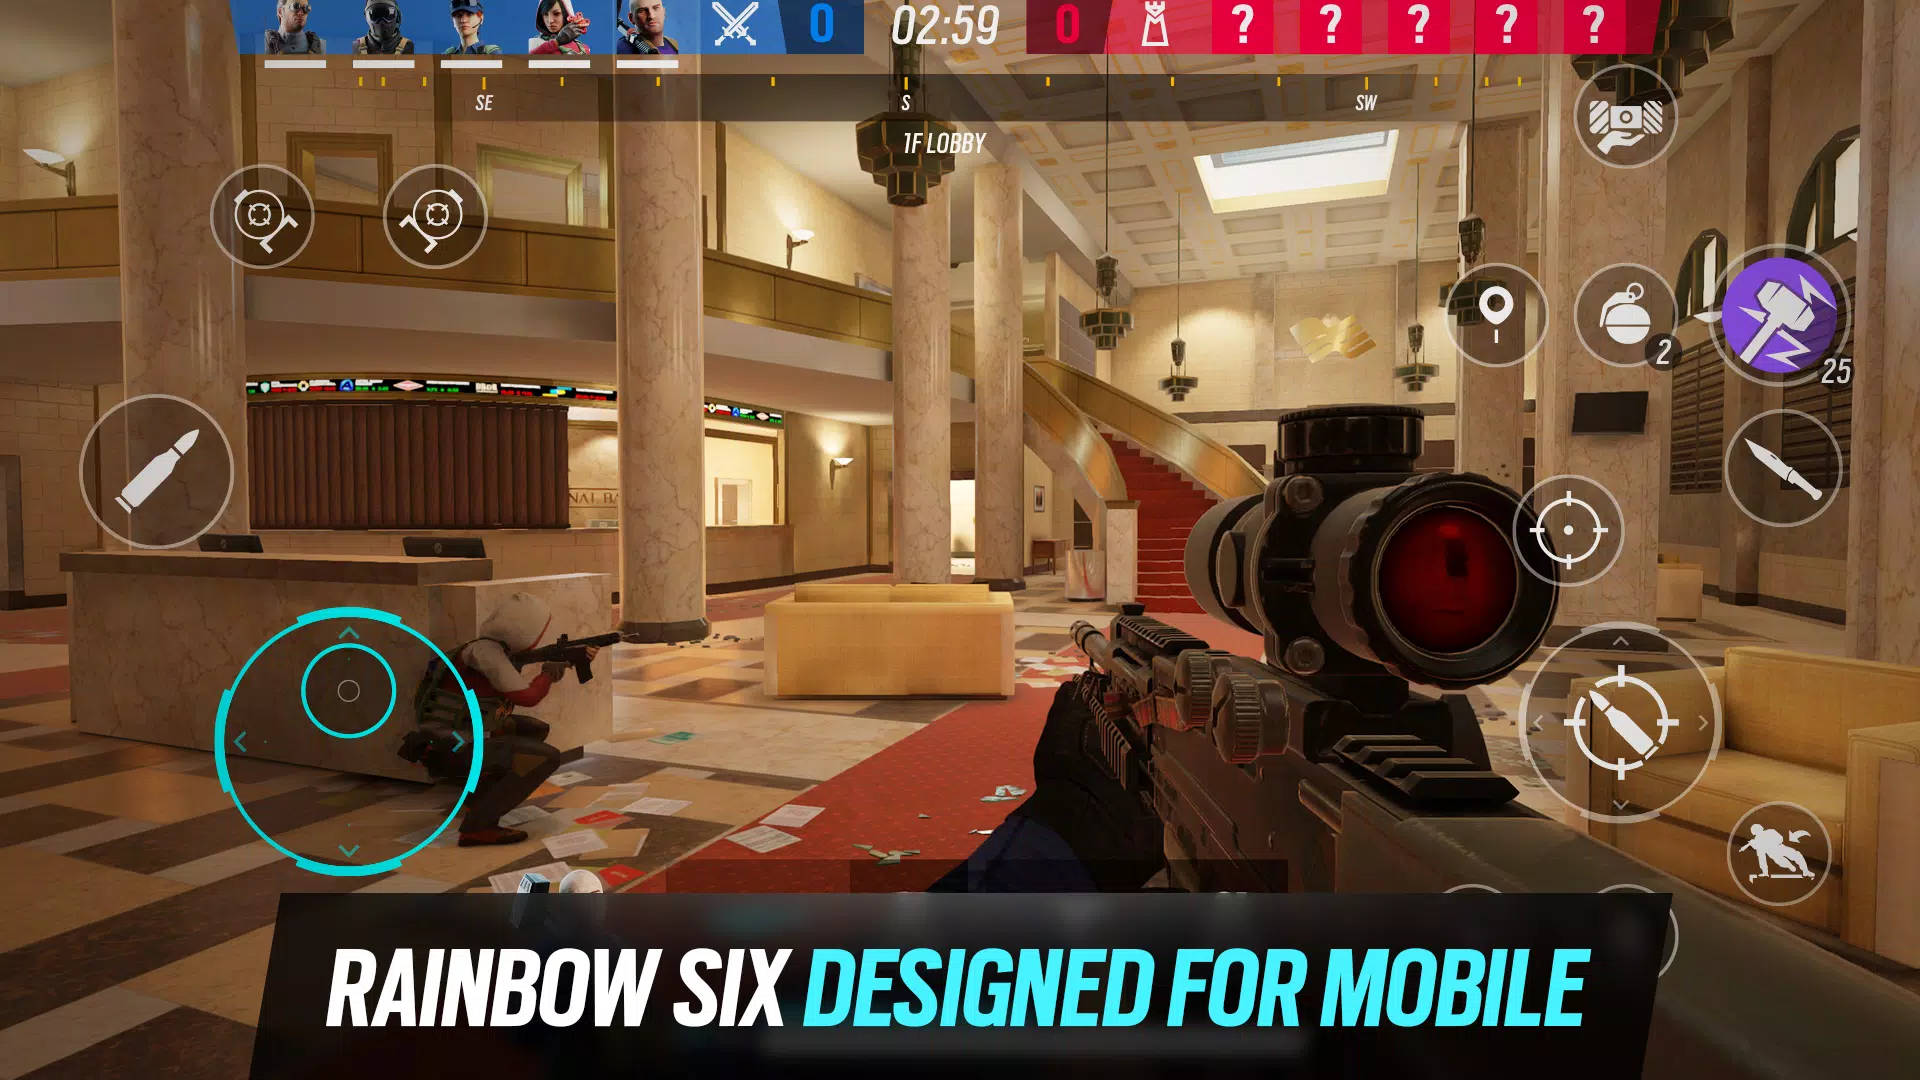 Download Tom Clancy Rainbow Six Siege MOBILE BETA apk - ANDROID - Techno  Brotherzz